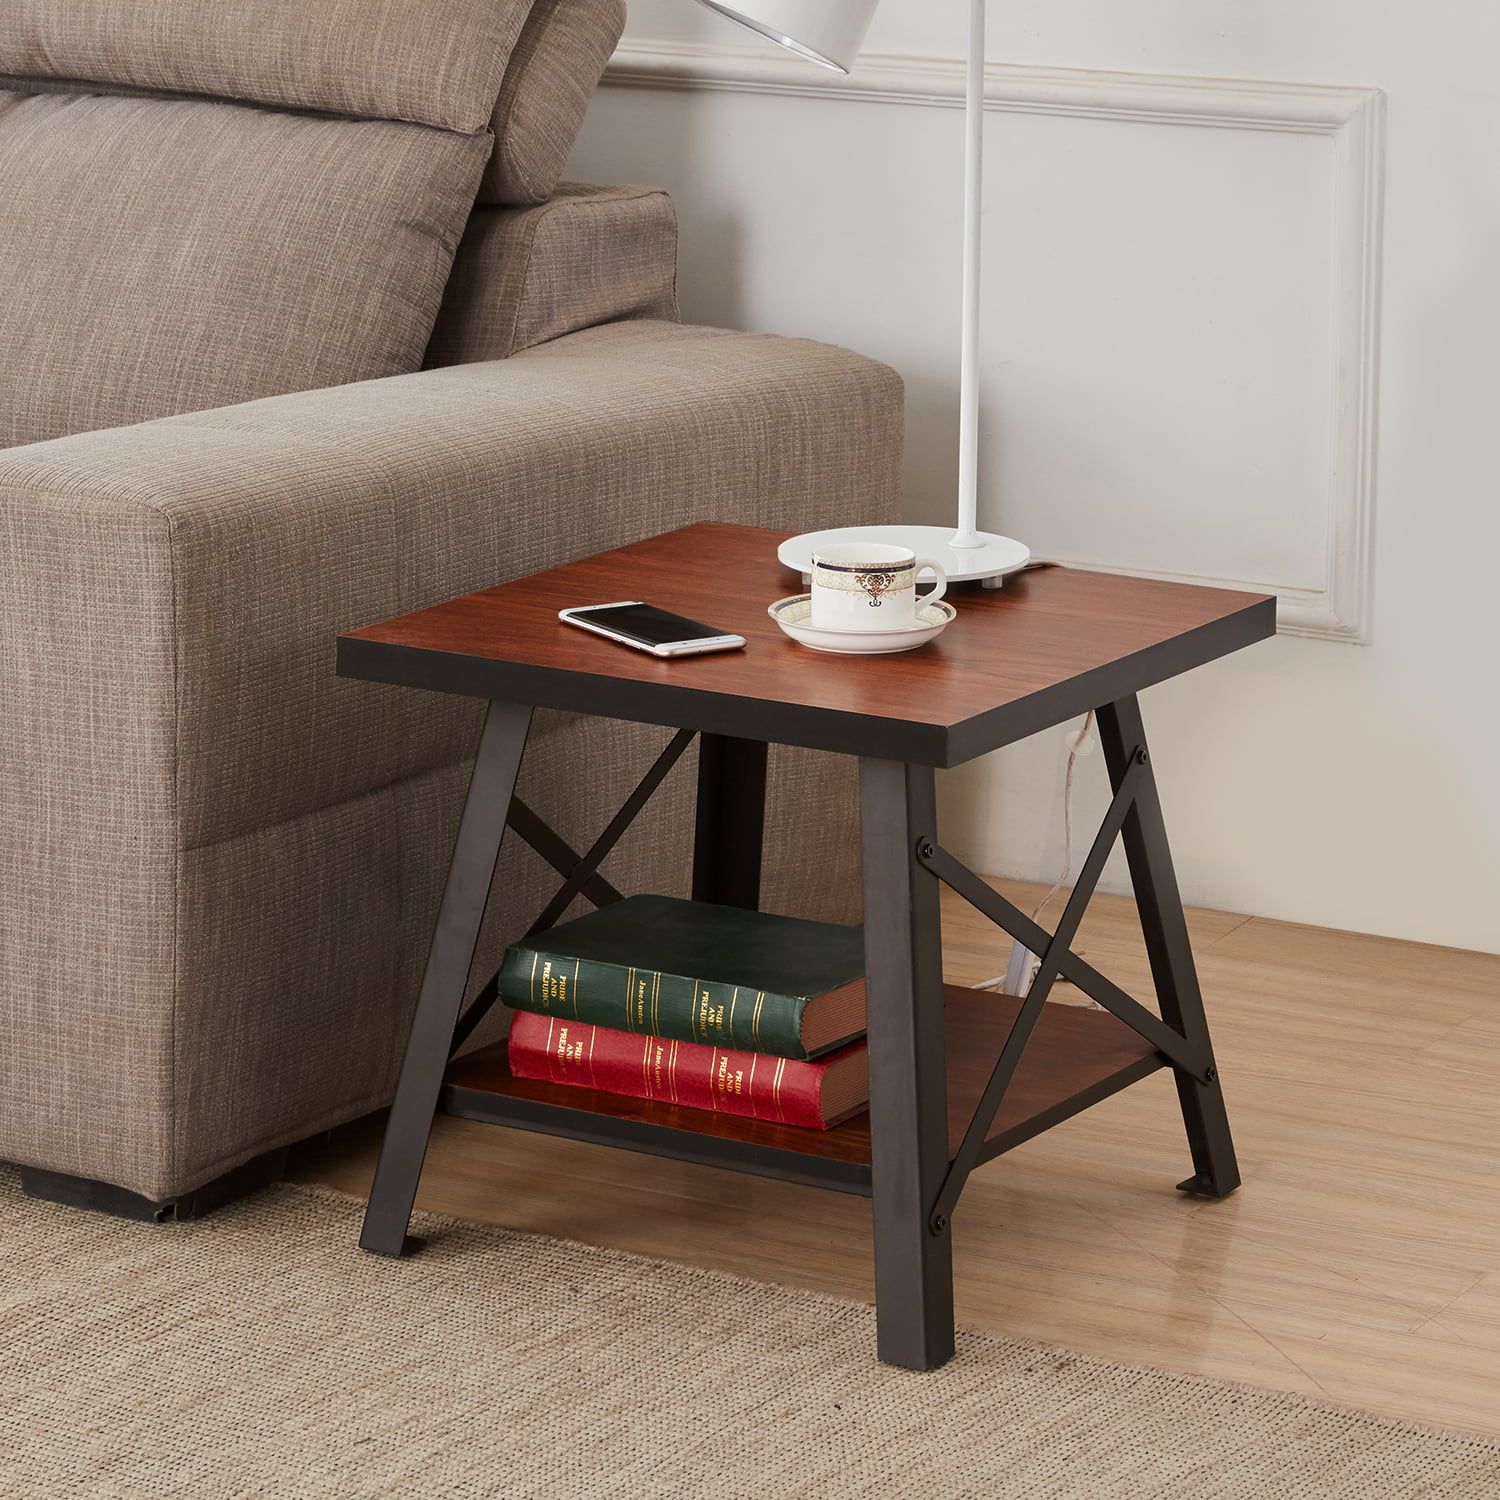 20" Open Storage Shelf Coffee Table End Table Square,industrial Style Regarding Coffee Tables With Open Storage Shelves (View 5 of 15)